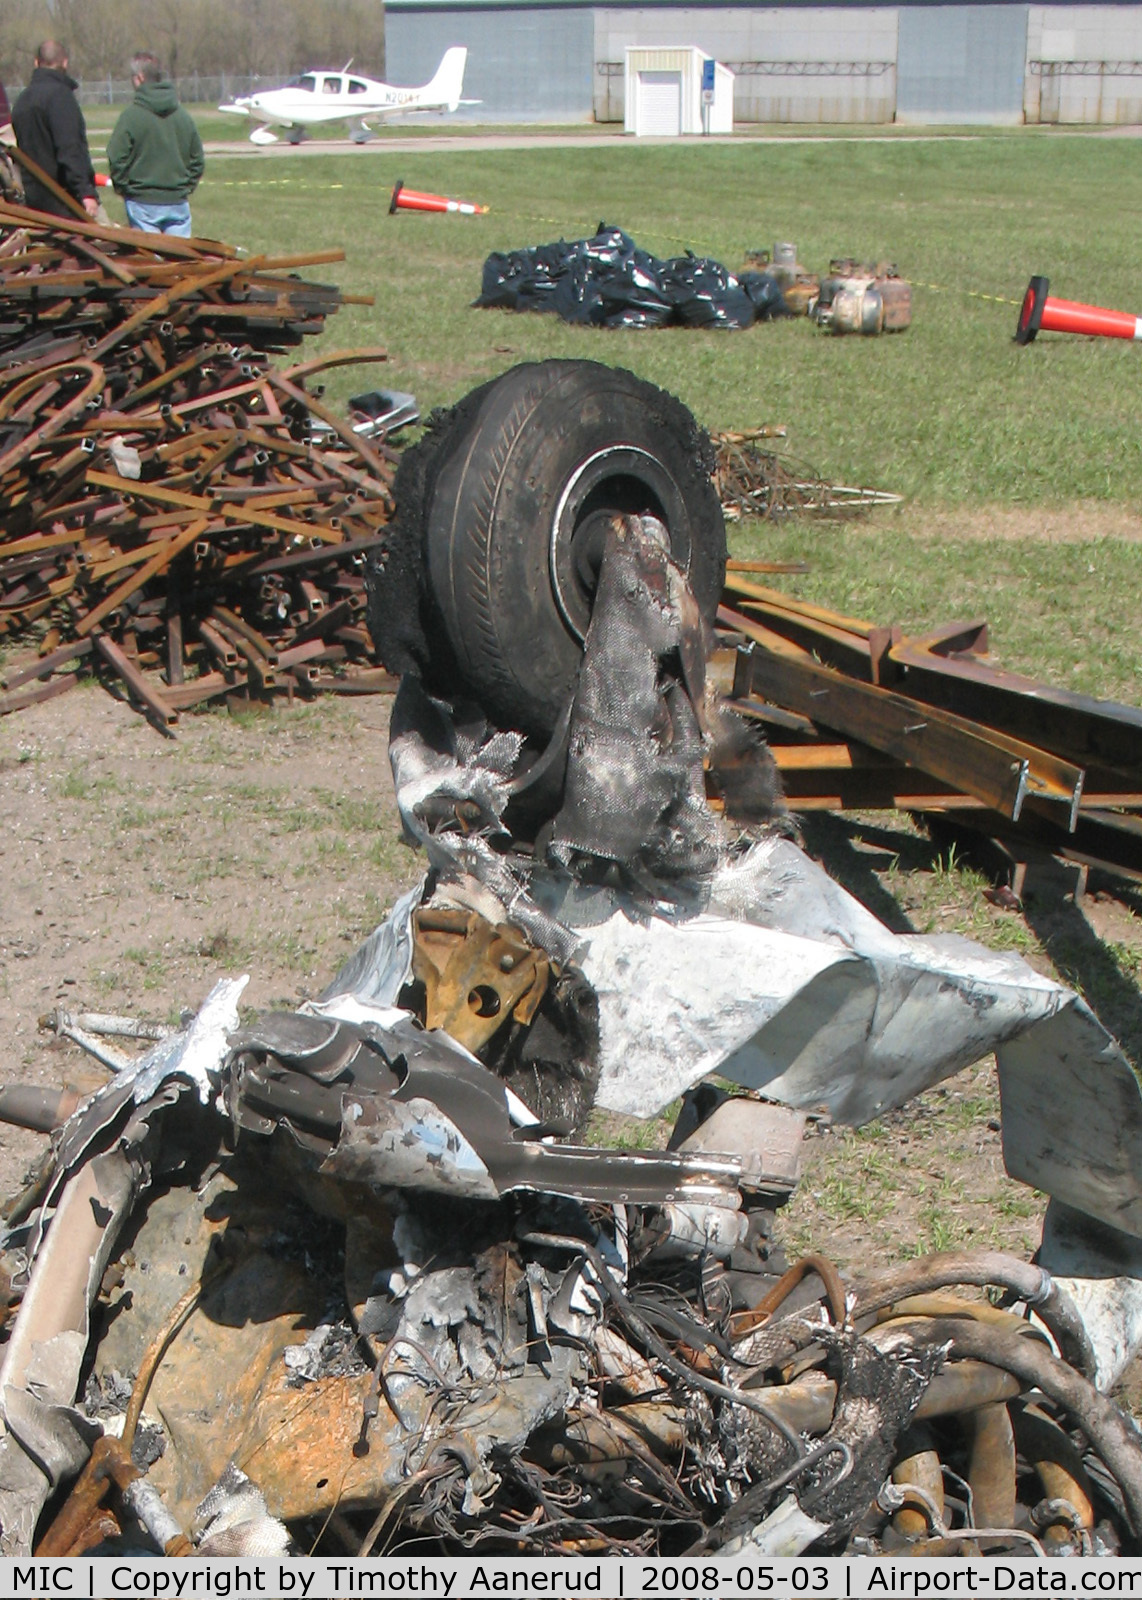 Crystal Airport (MIC) - The remains of a Piper PA-28 after a hangar fire.  Note the fiberglass cloth from the nose wheelpant survived, but the resin has melted away.